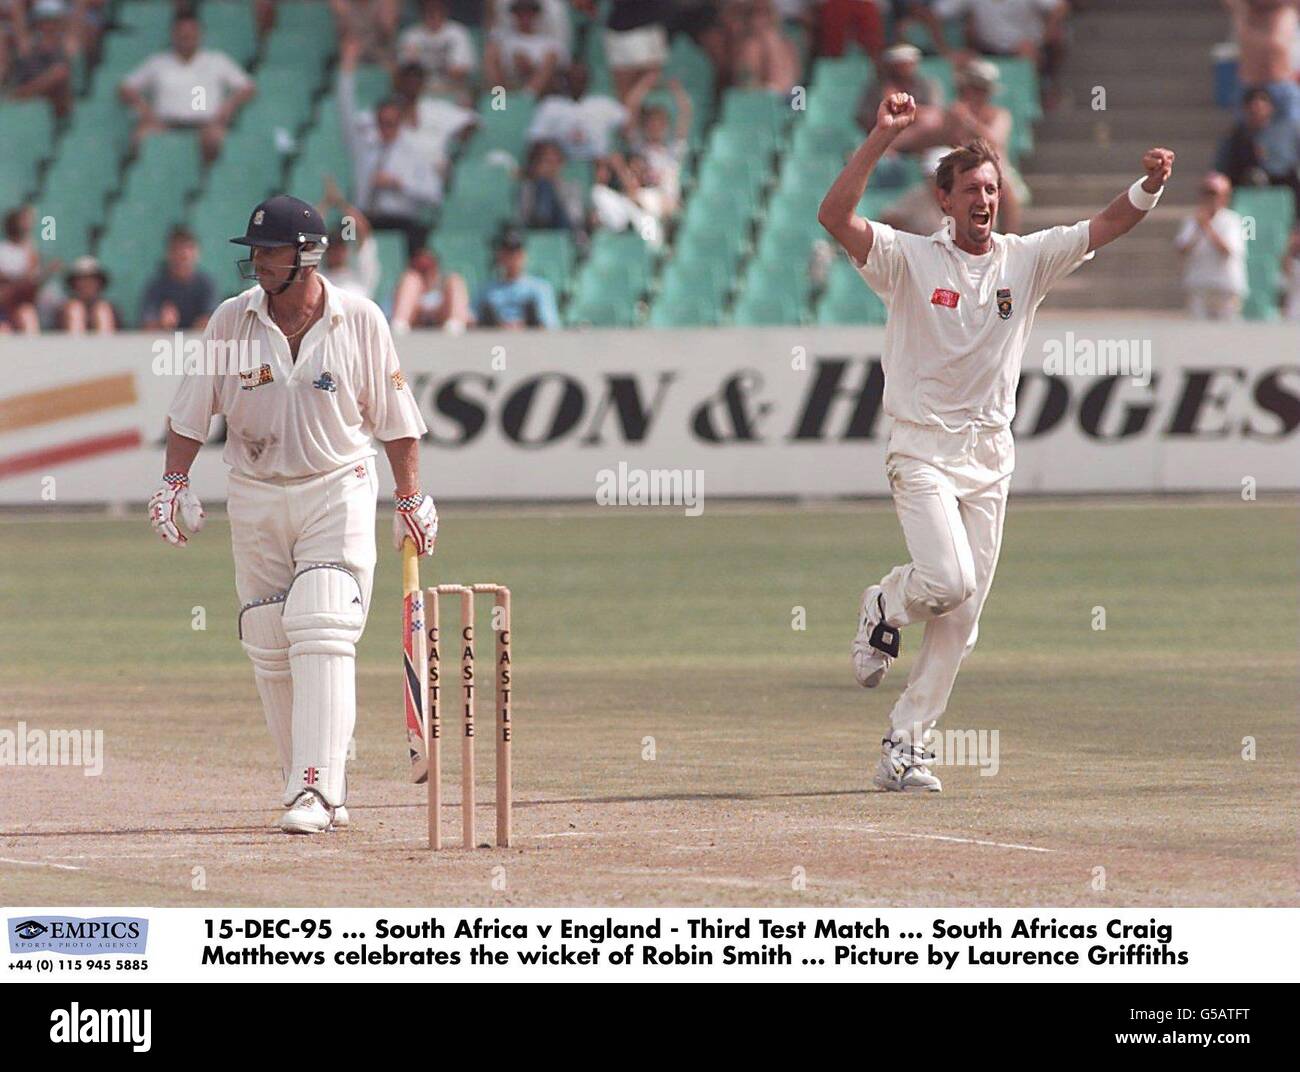 15-DEC-95, South Africa v England - Third Test Match, South Africas Craig Matthews celebrates the wicket of Robin Smith, Picture by Laurence Griffiths Stock Photo